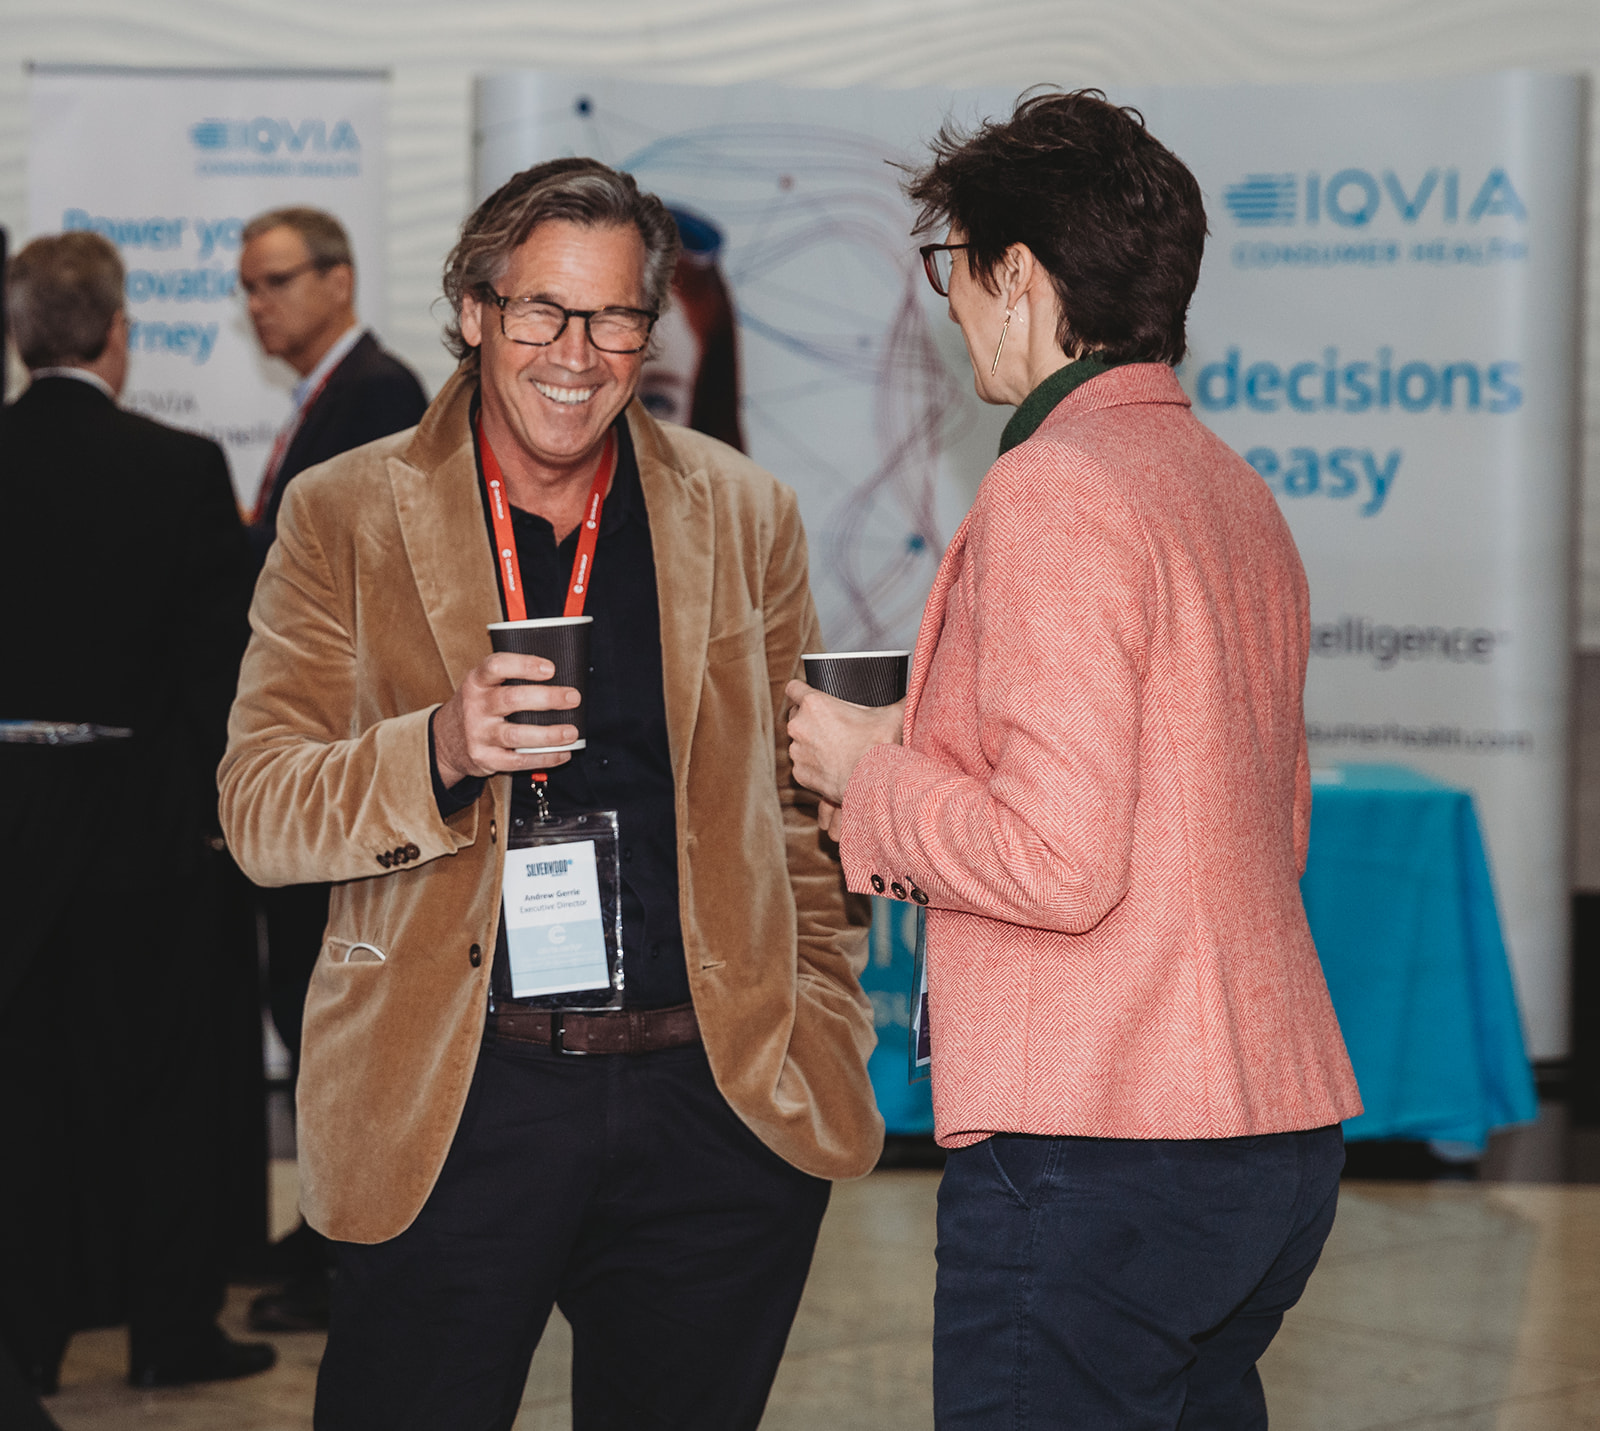 Two people in business attire networking at the Ceuta International Conference